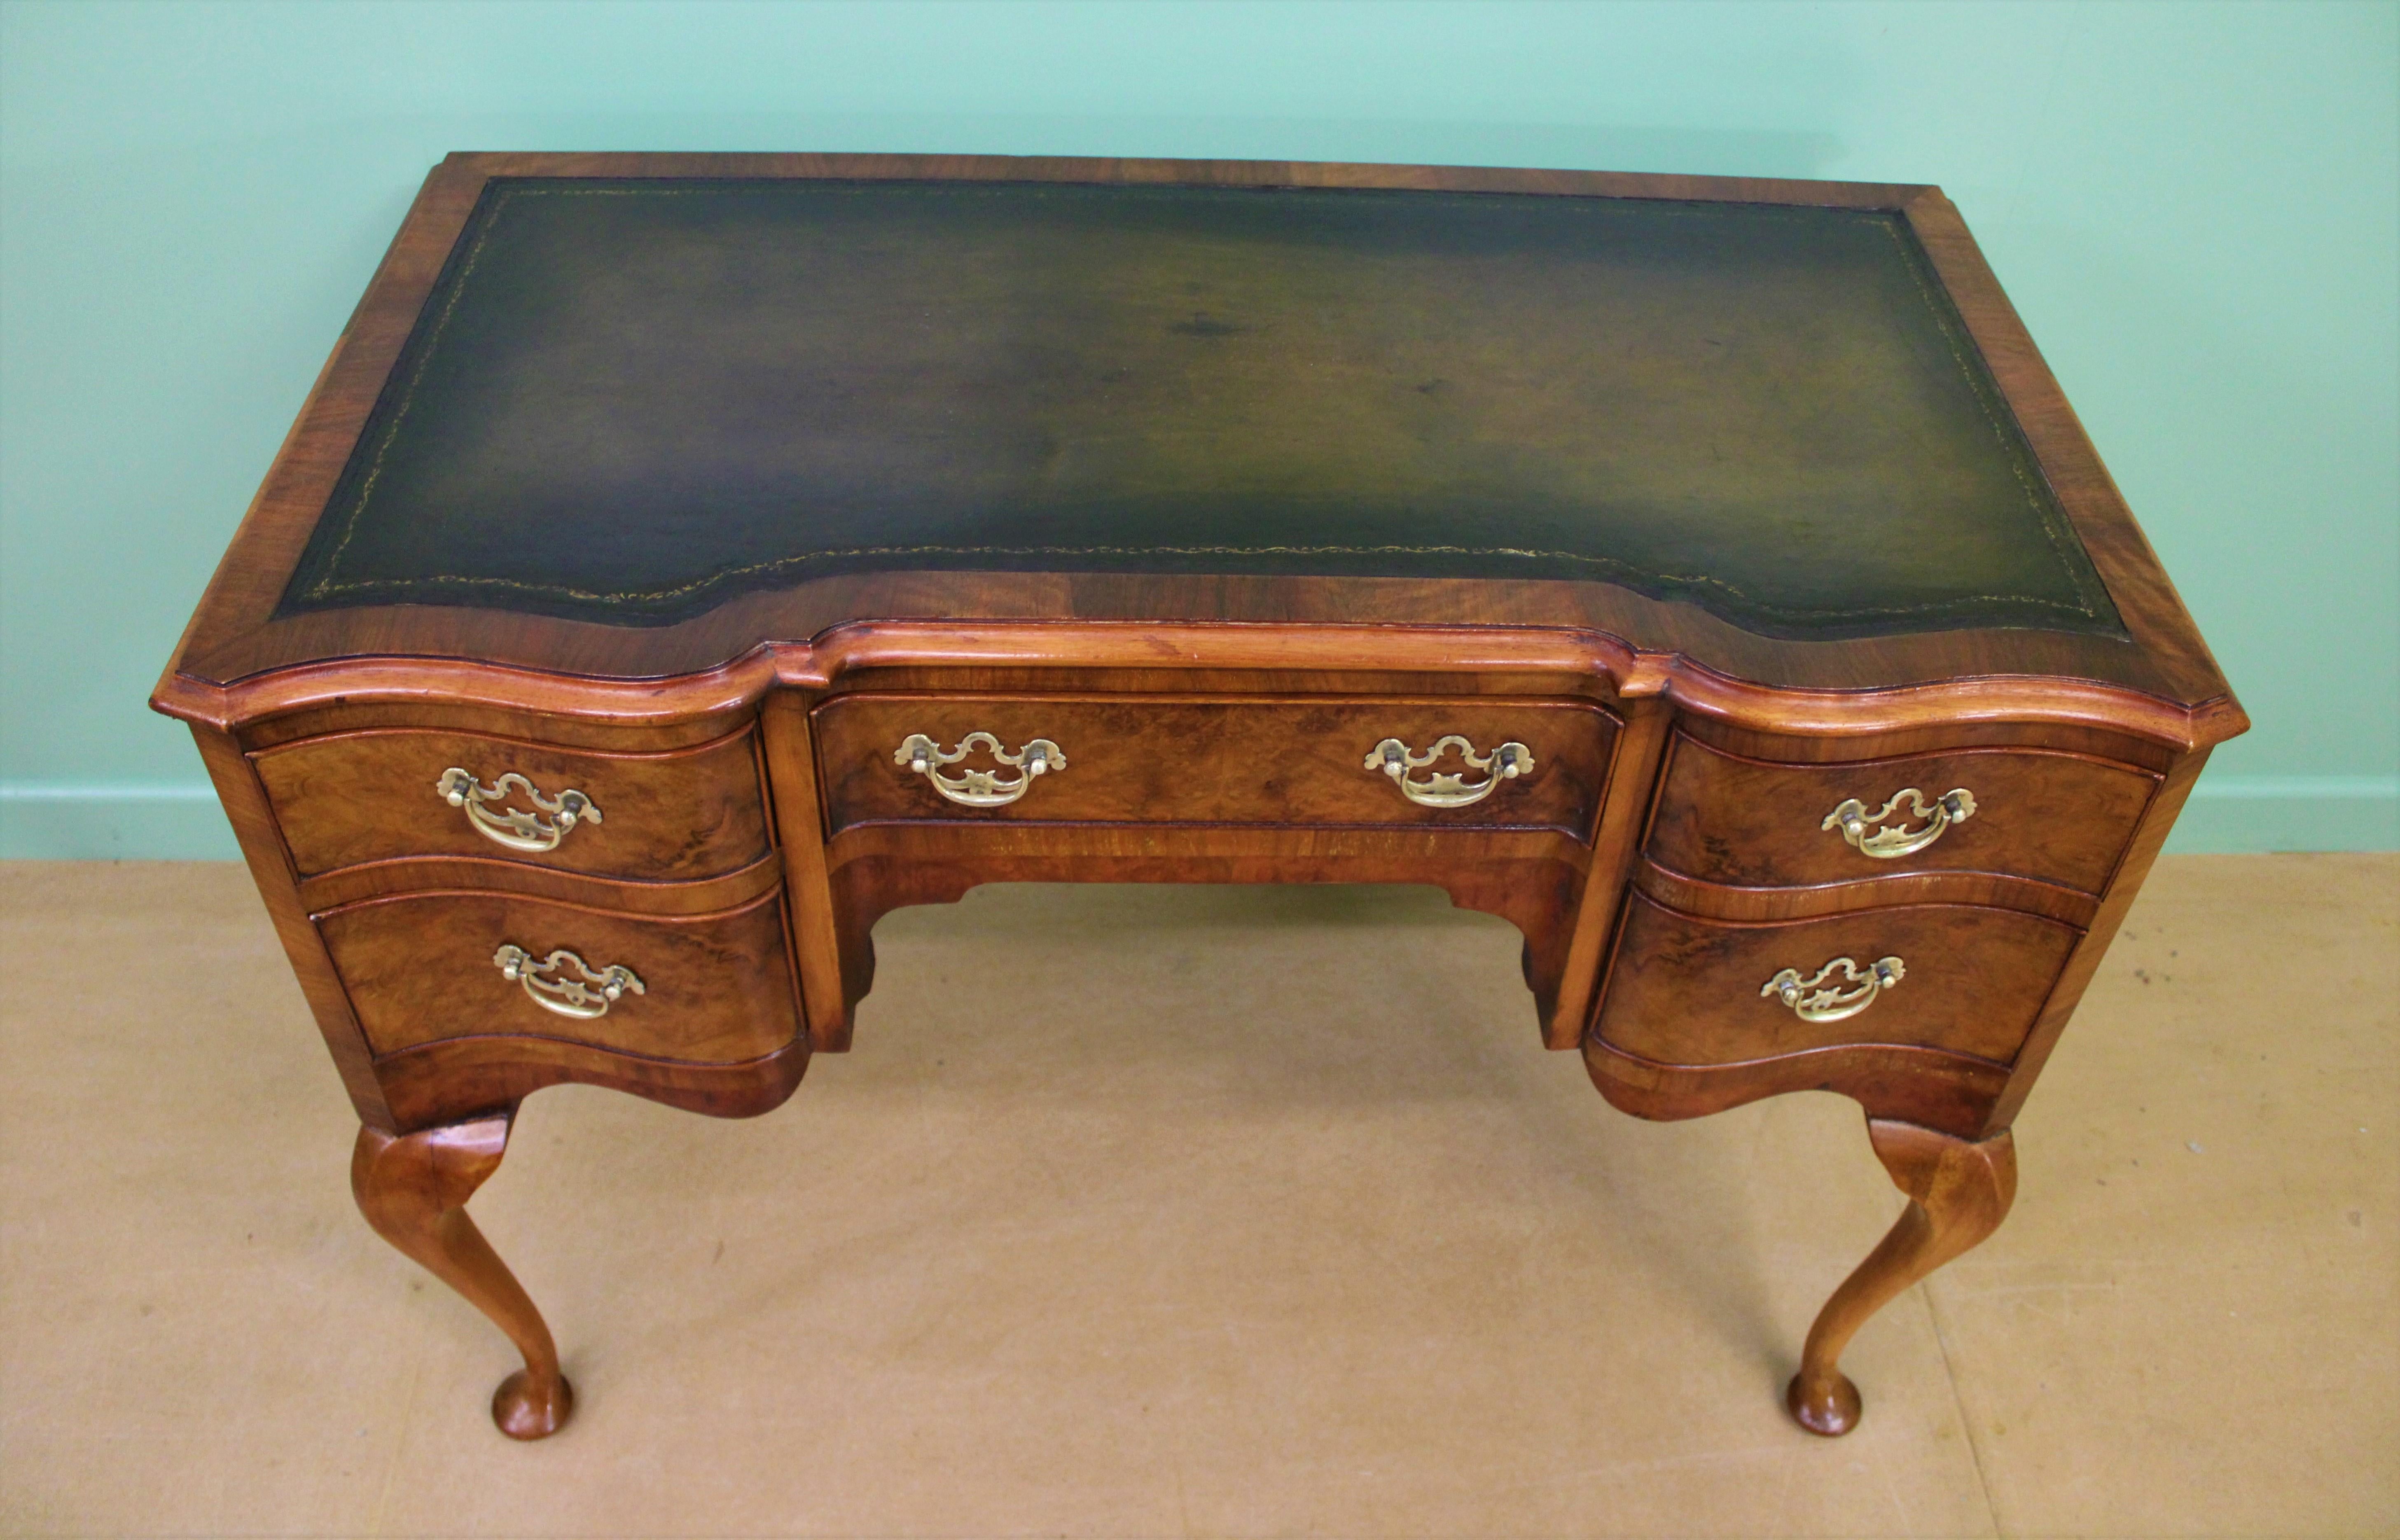 A very good Queen Anne style burr walnut serpentine fronted writing table, or desk. Well constructed in solid walnut with attractive burr walnut veneers. The top fitted with a sumptuous green leather writing surface. With a series of 5 drawers, all